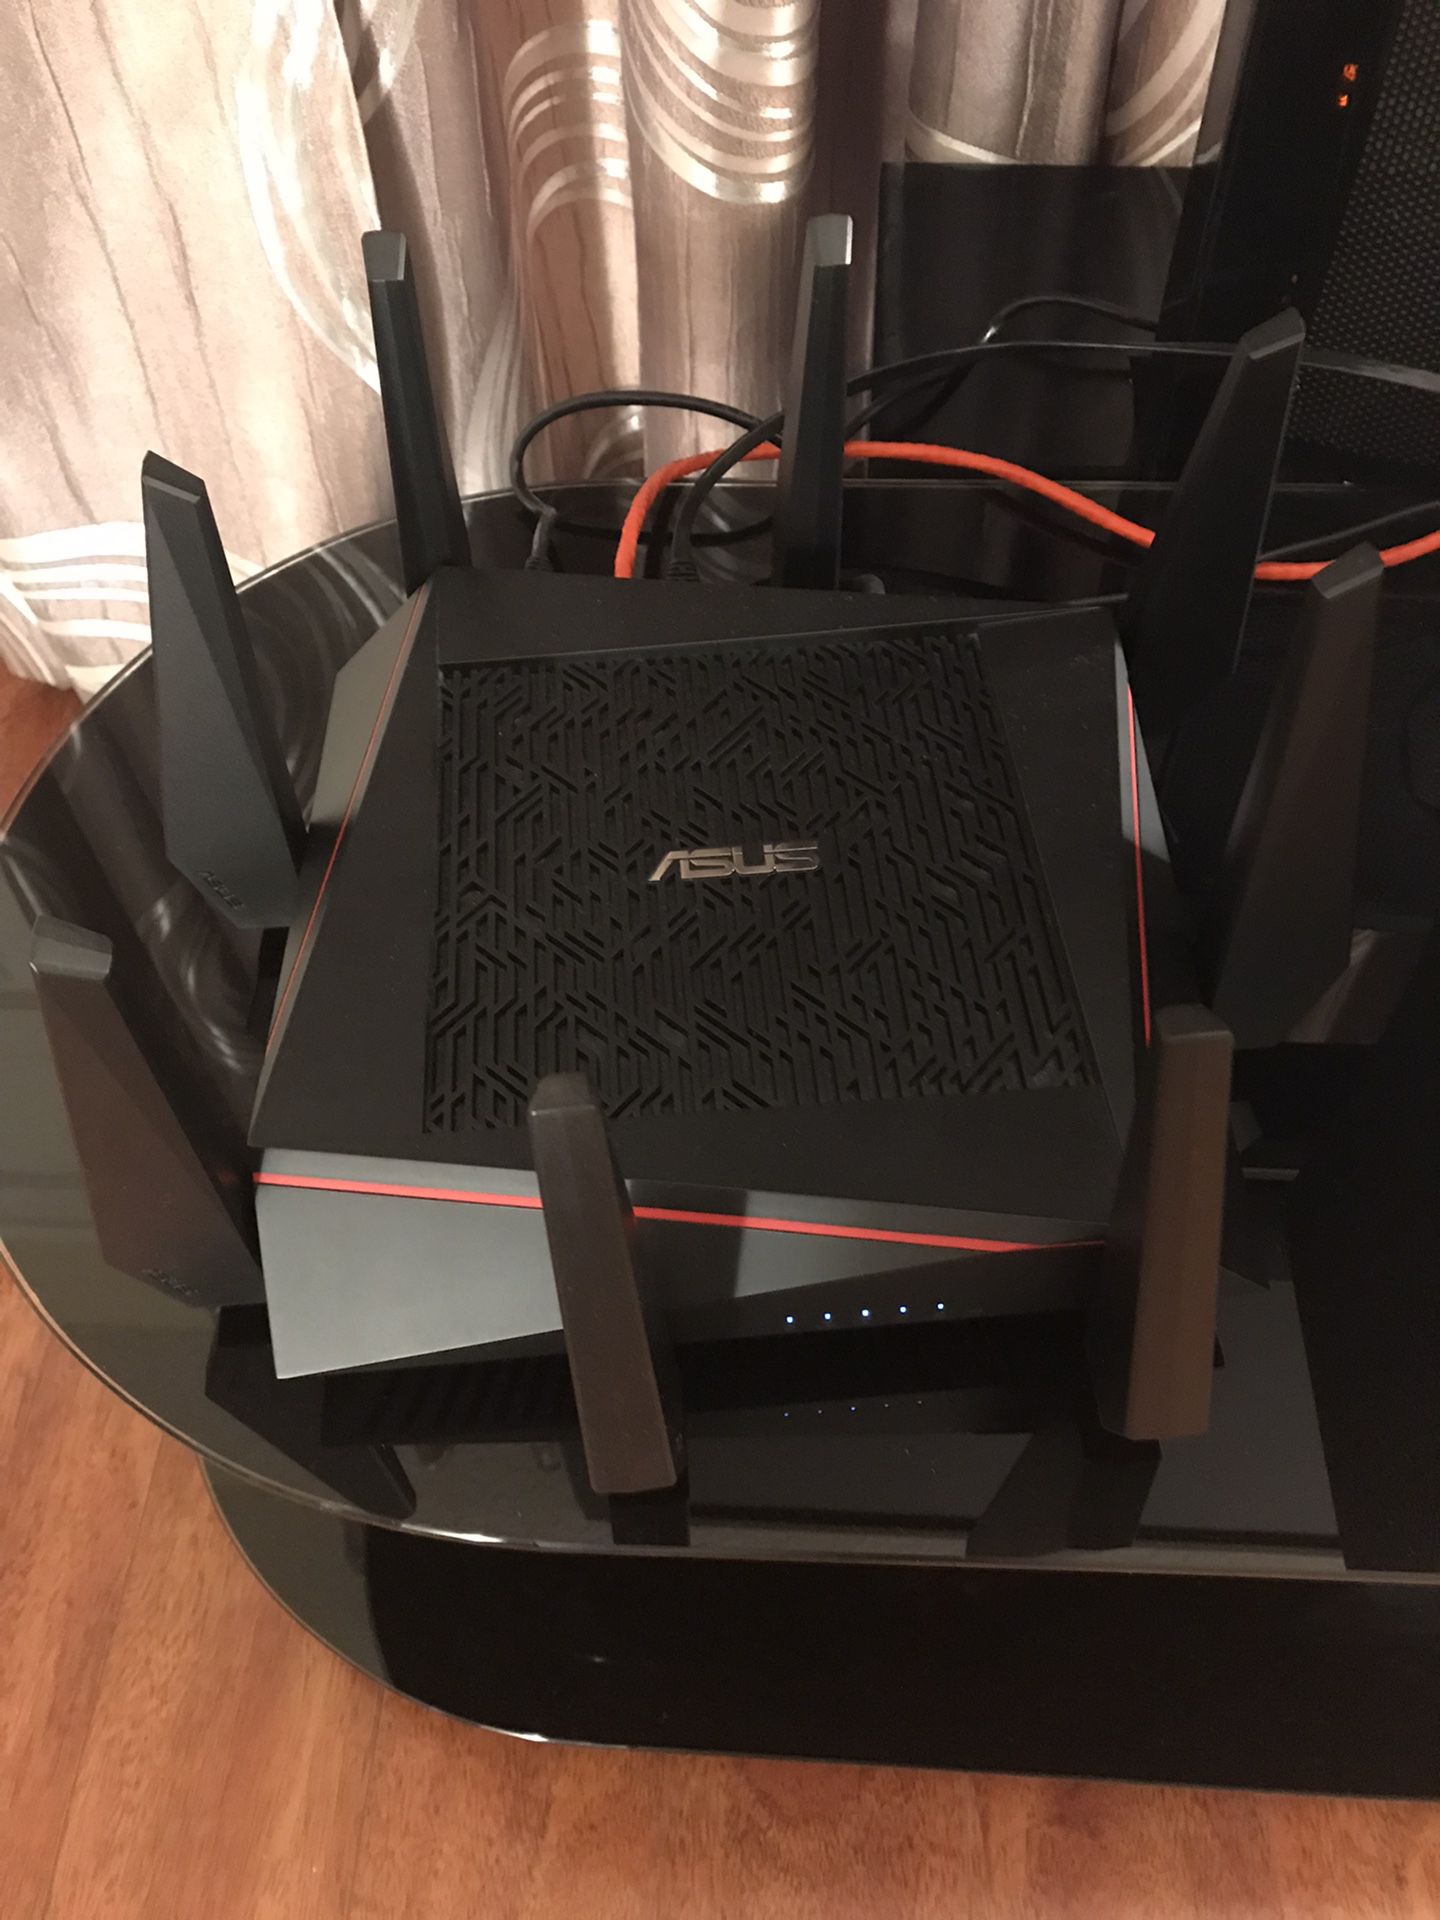 ASUS AC5300 Tri-Band Router WiFi